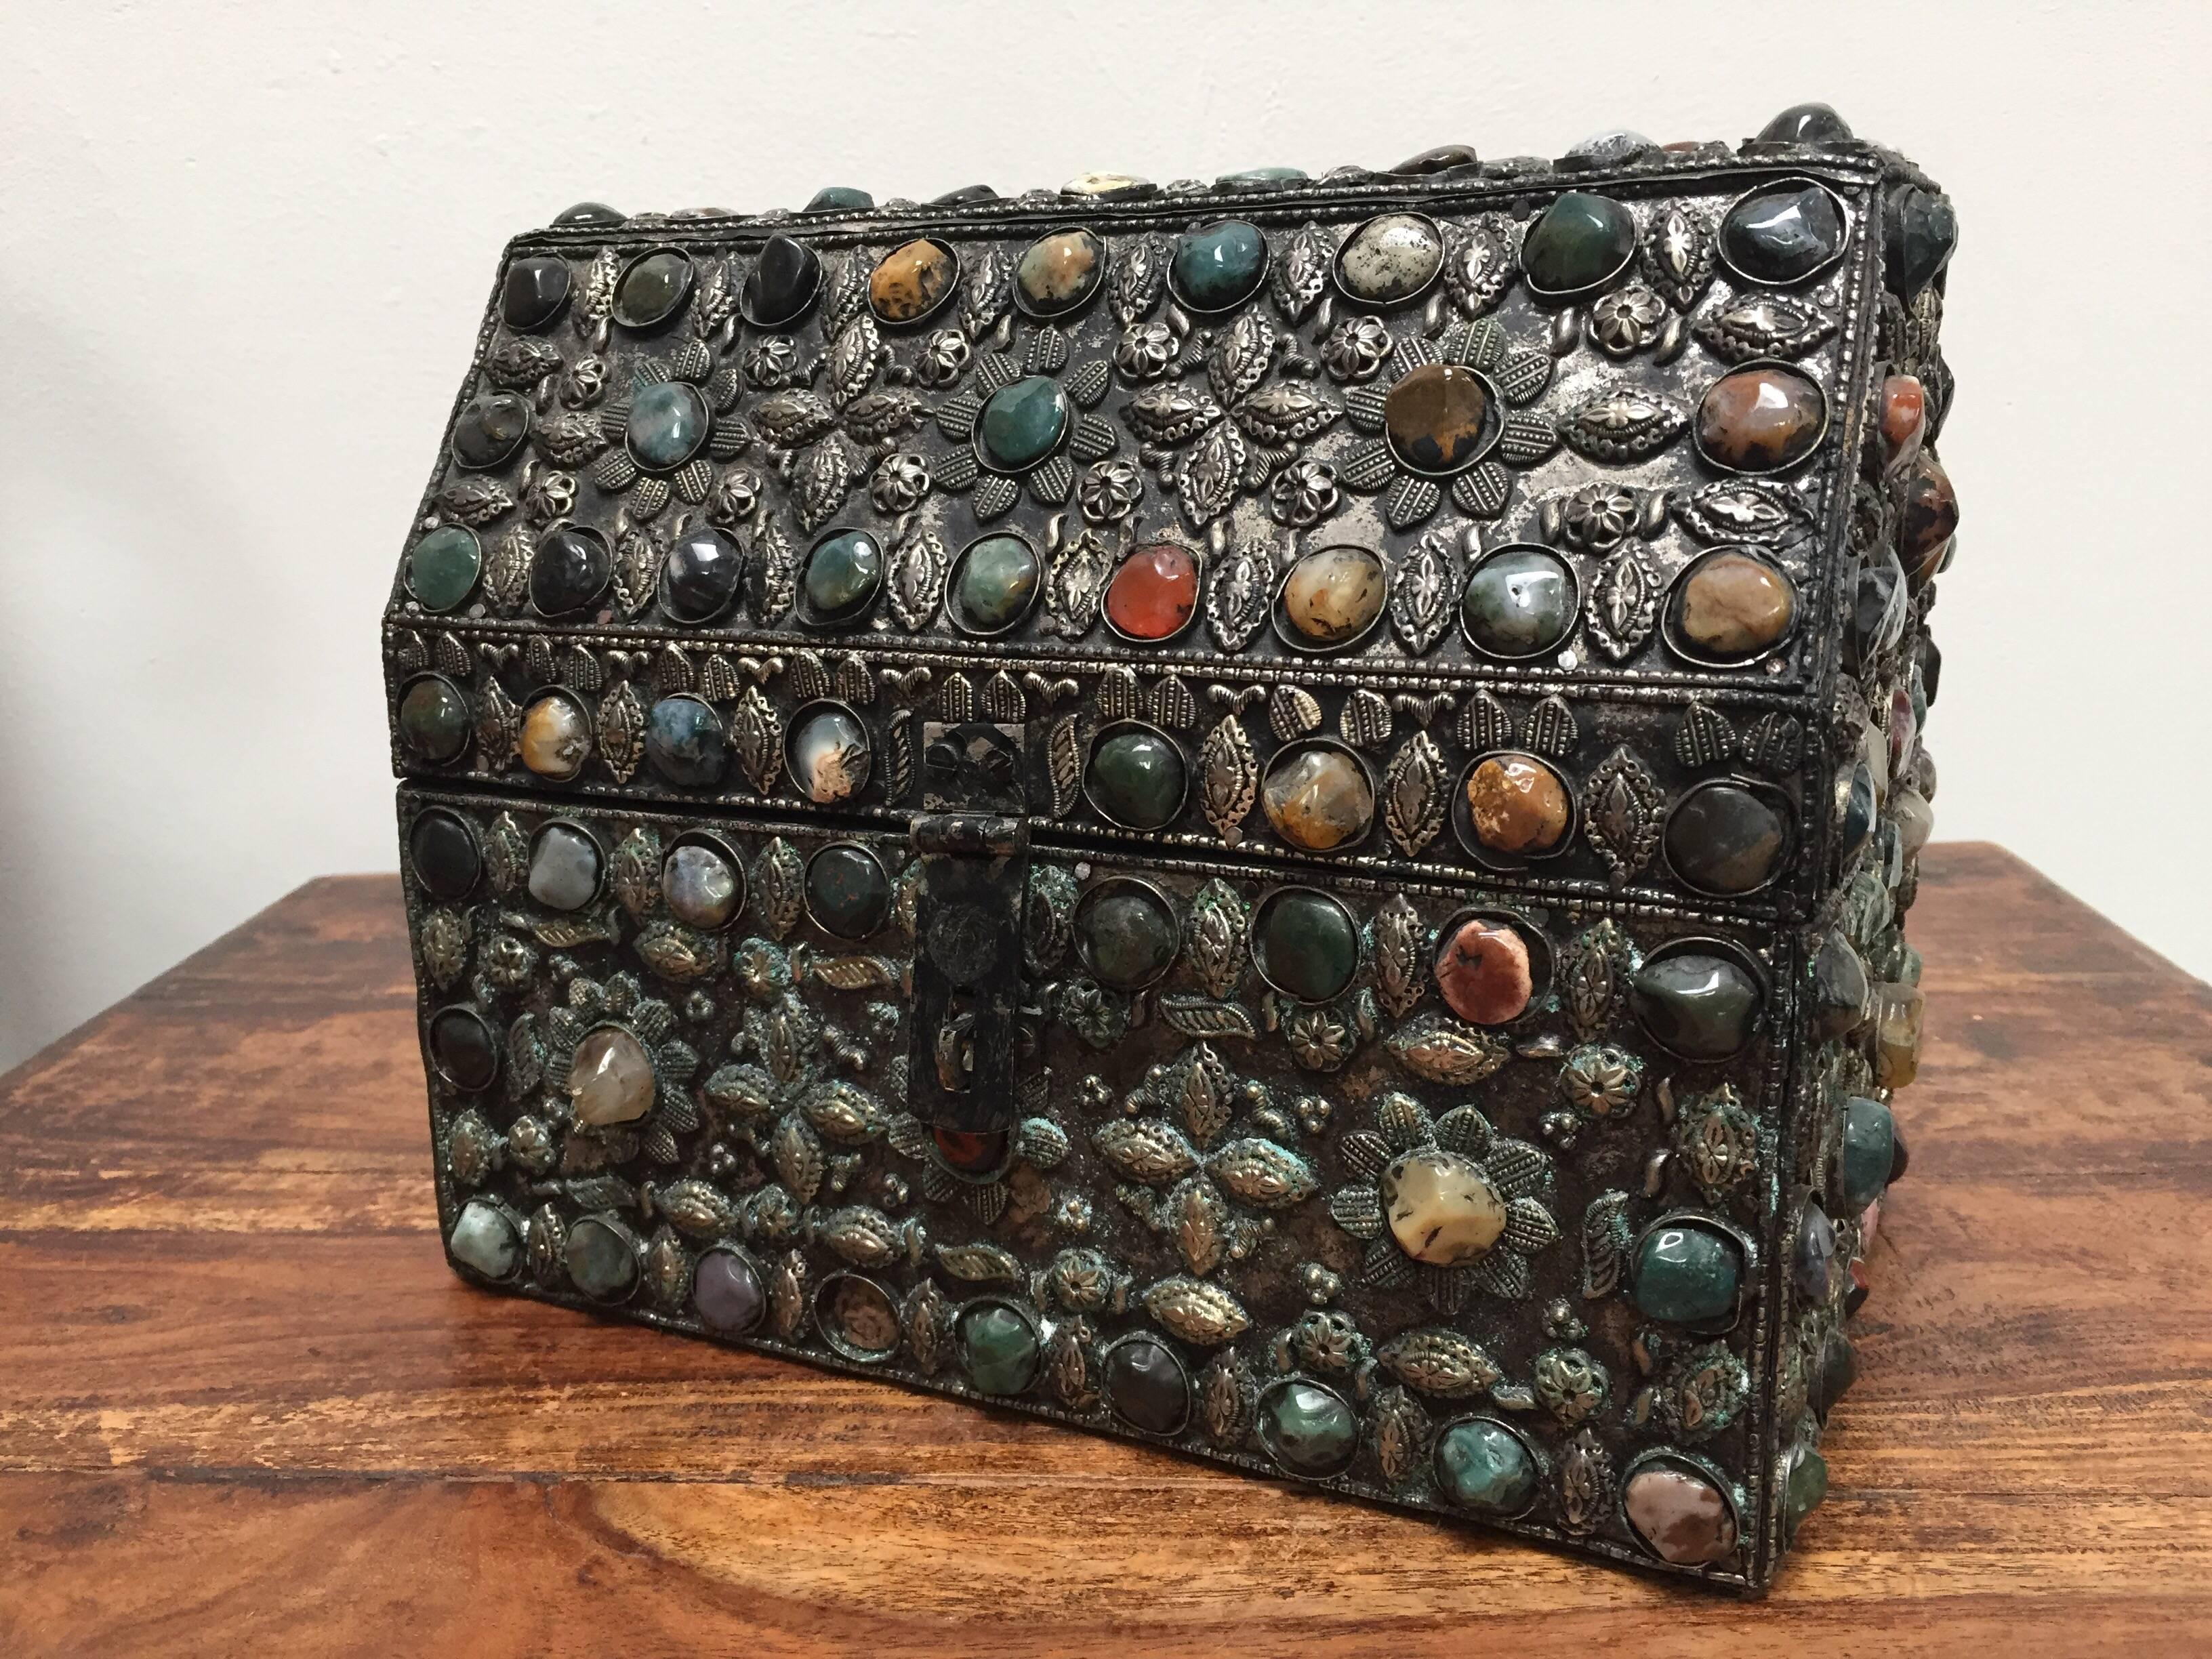 Large vintage Moroccan wedding jewelry box inlaid with semi-precious colored stones and covered with silvered hammered metal filigree with Moorish design.
Large Moroccan jewelry box very impressive, used by the Berber bridegroom to transport his